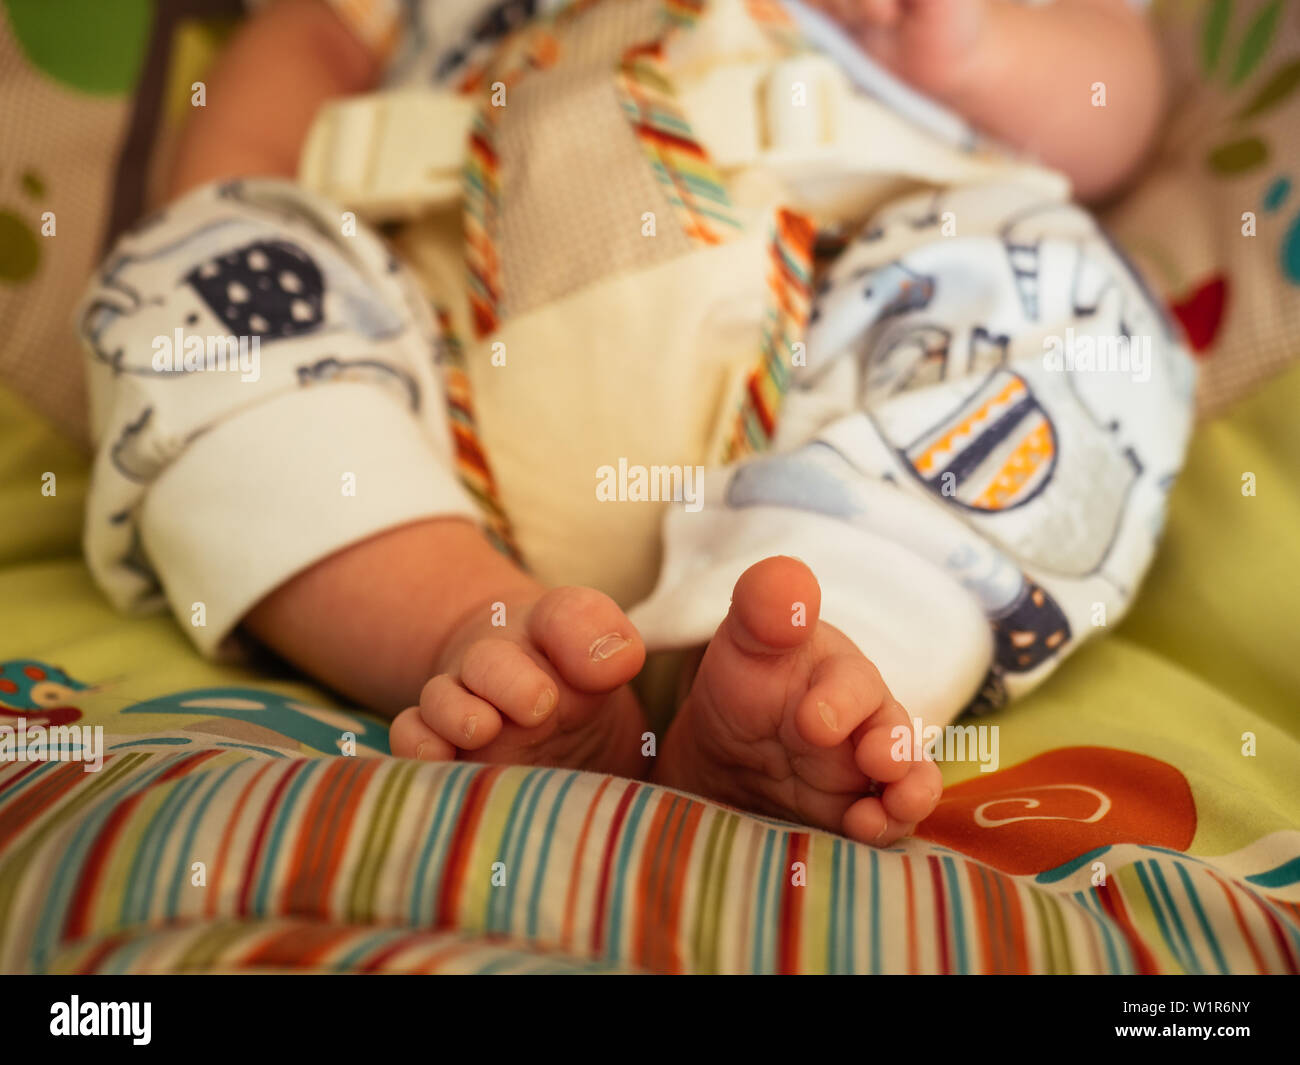 Baby in Toy Bouncer Stock Photo